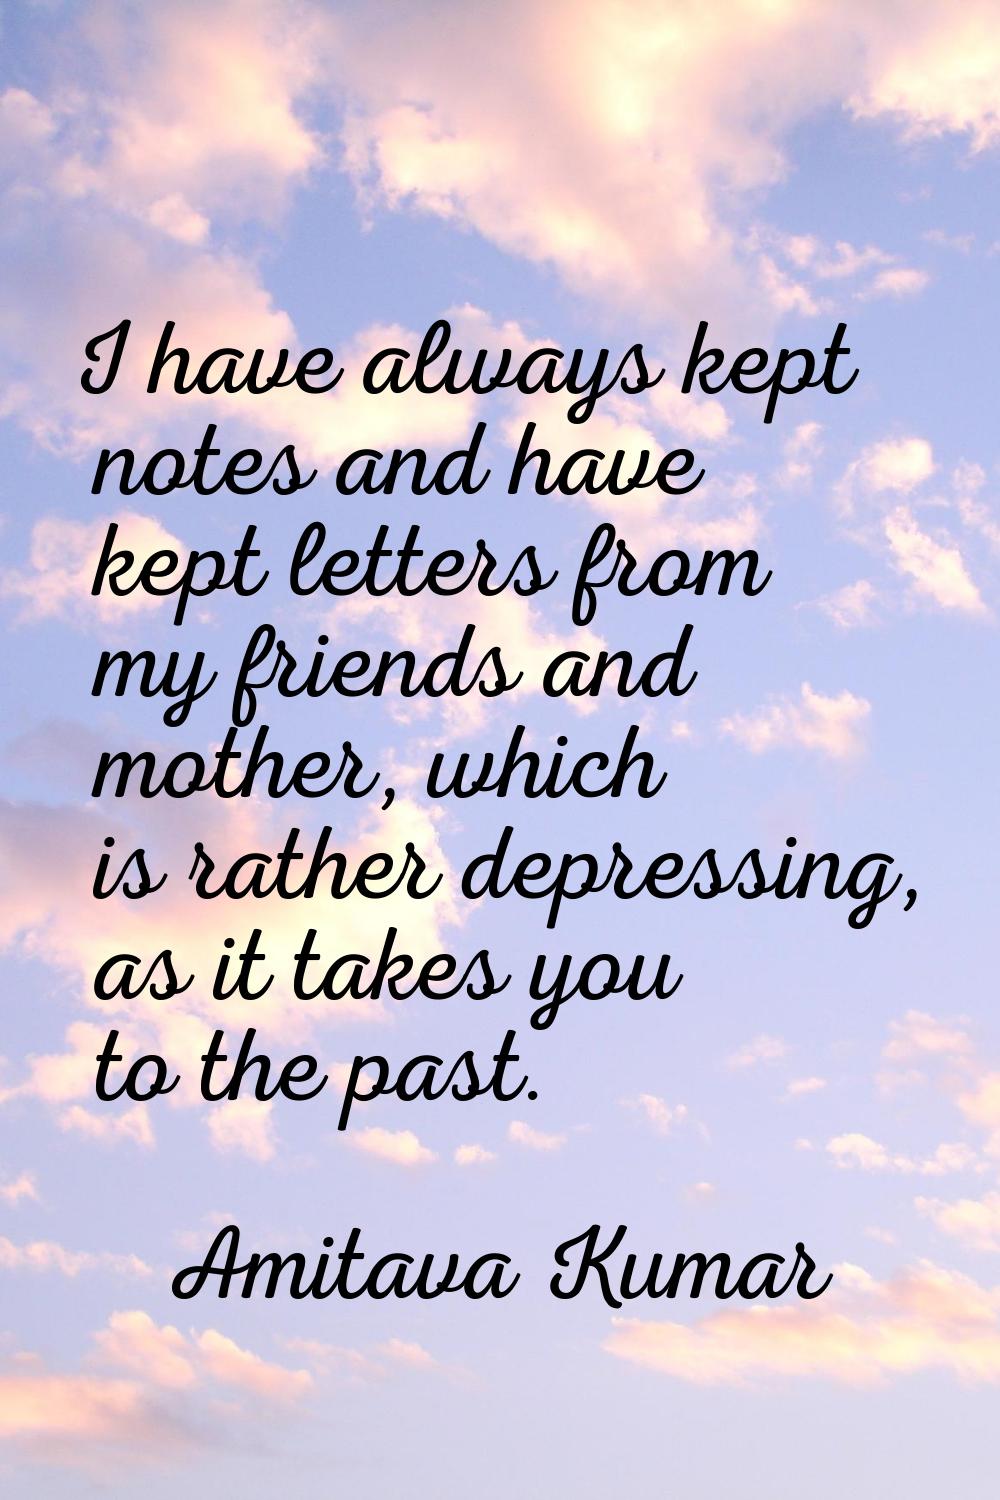 I have always kept notes and have kept letters from my friends and mother, which is rather depressi